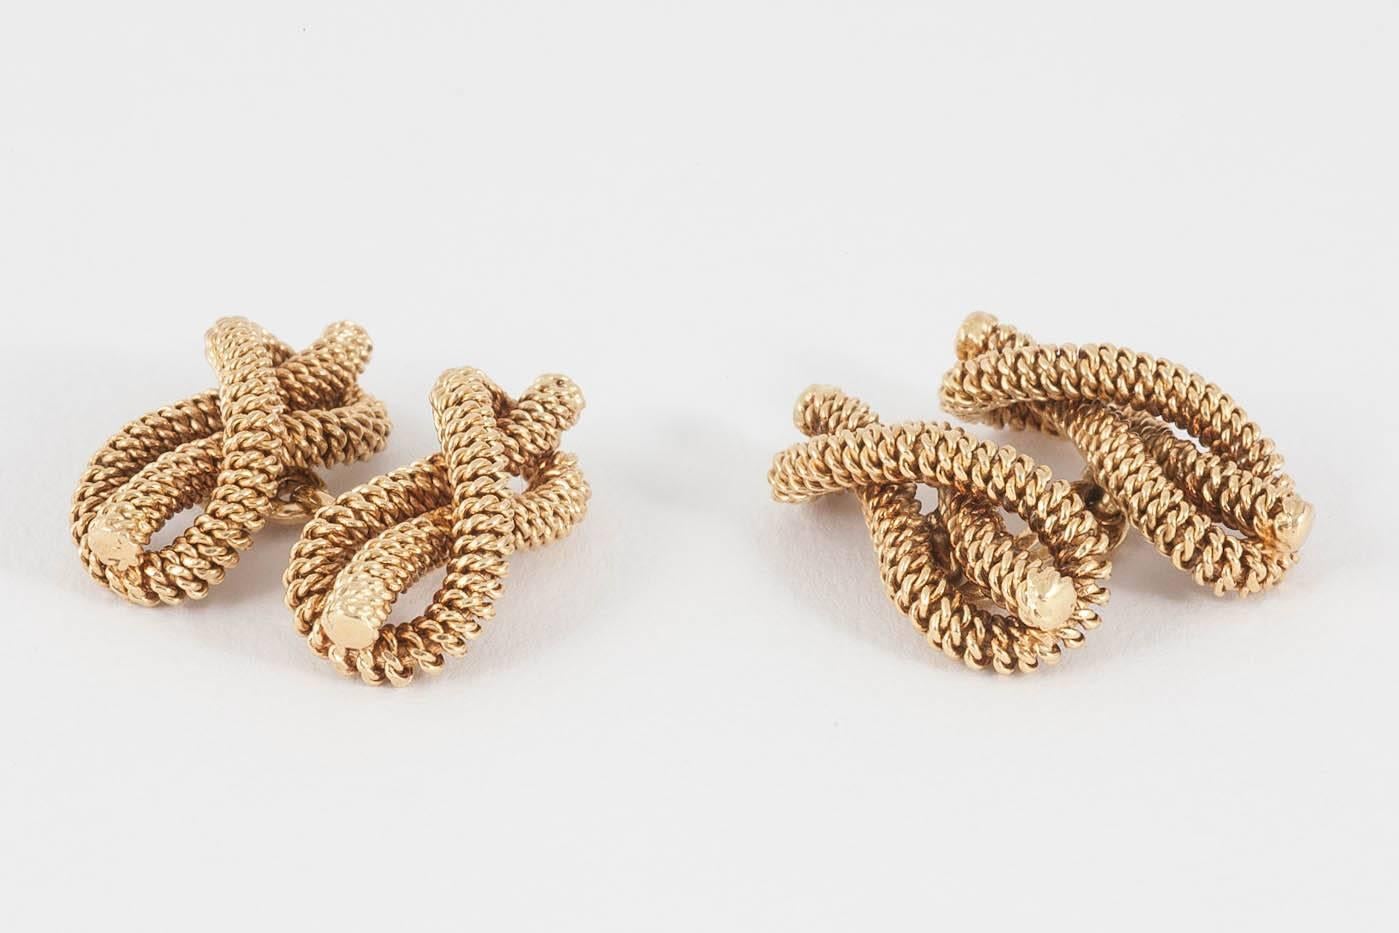 A heavy quality pair of 18kt yellow gold double sided cufflinks in the form of a reef knot or figure of eight, in a wirework design, finely made .signed Tiffany and co. Italy circa 1950-60